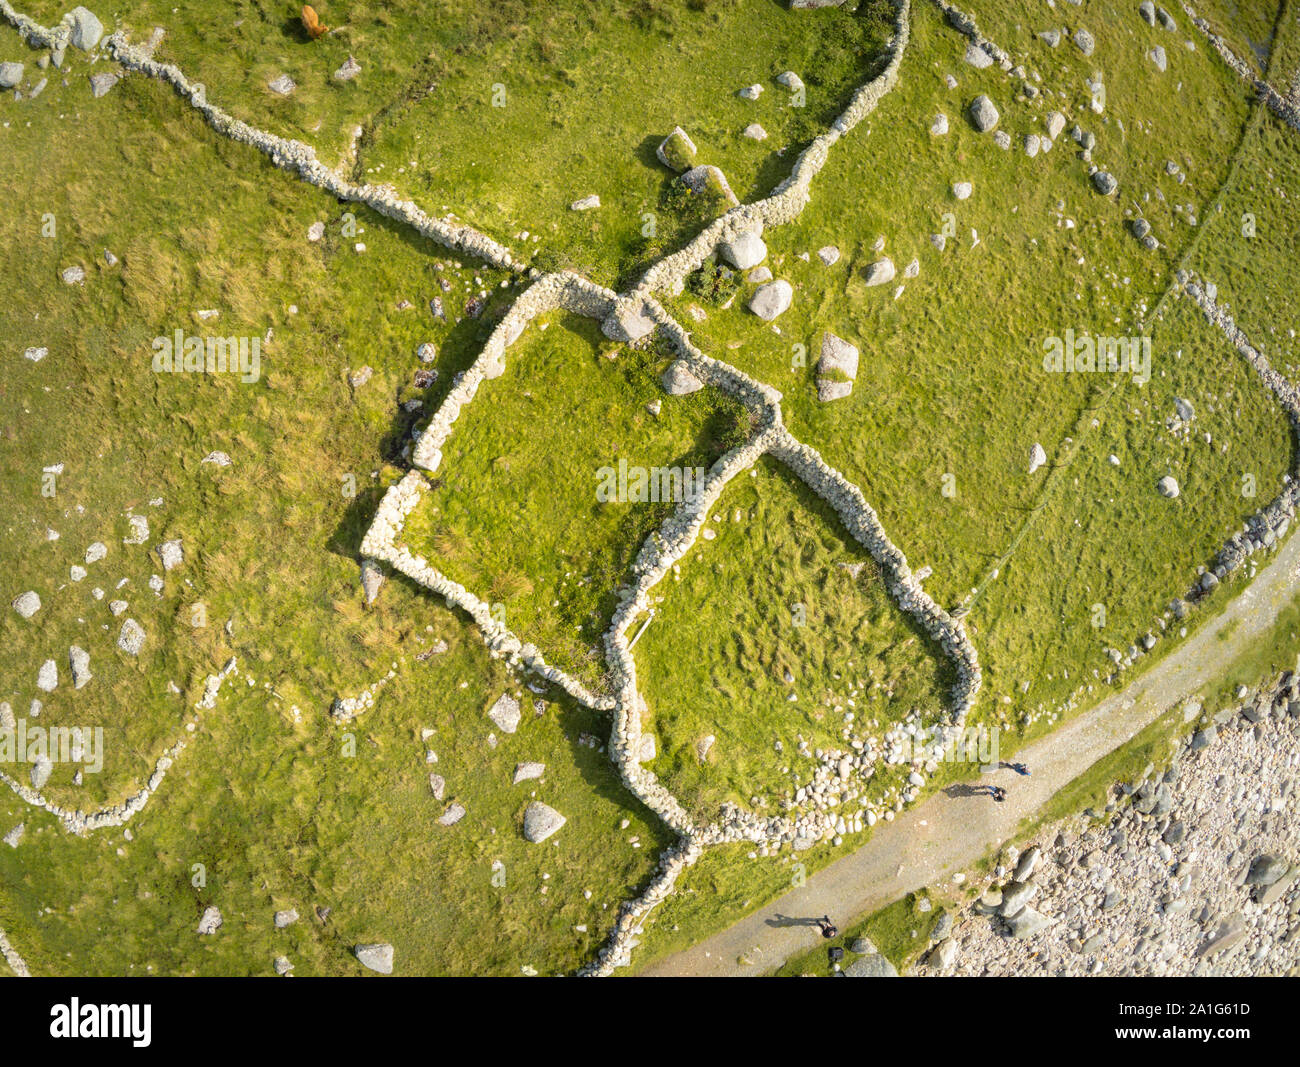 This is an aerial drone photograph of looking strait down onto old stone walls and fields in Ireland Stock Photo